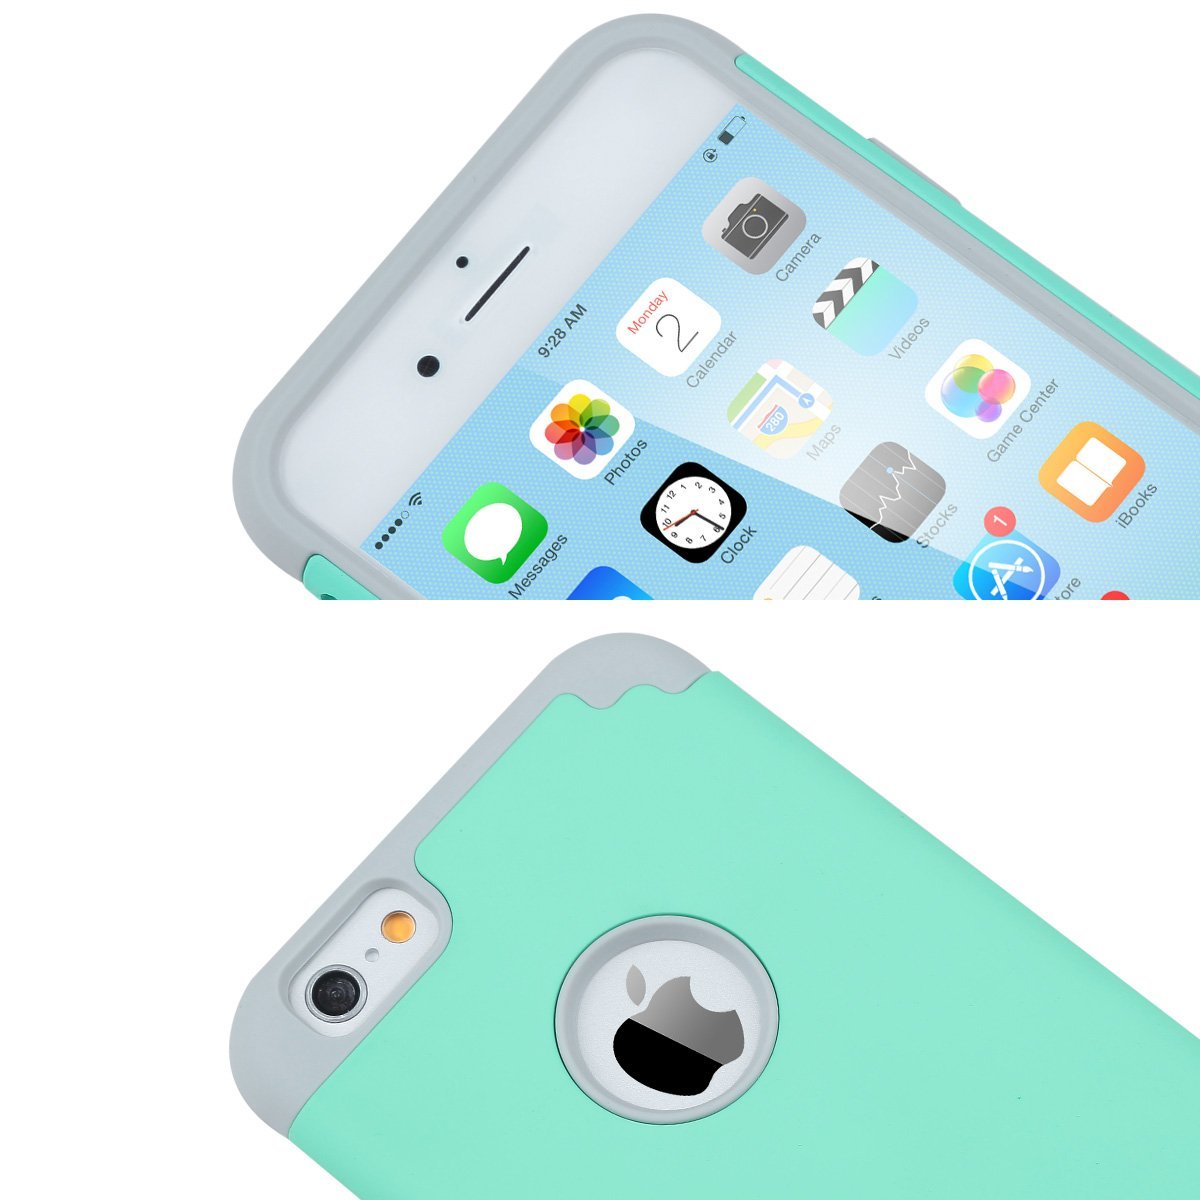 ULAK iPhone 6 Case, iPhone 6S Case, Slim Dual Layer Shockproof Bumper Phone Case for Apple iPhone 6 / 6s for Girls Women, Turquoise/Grey - image 2 of 7